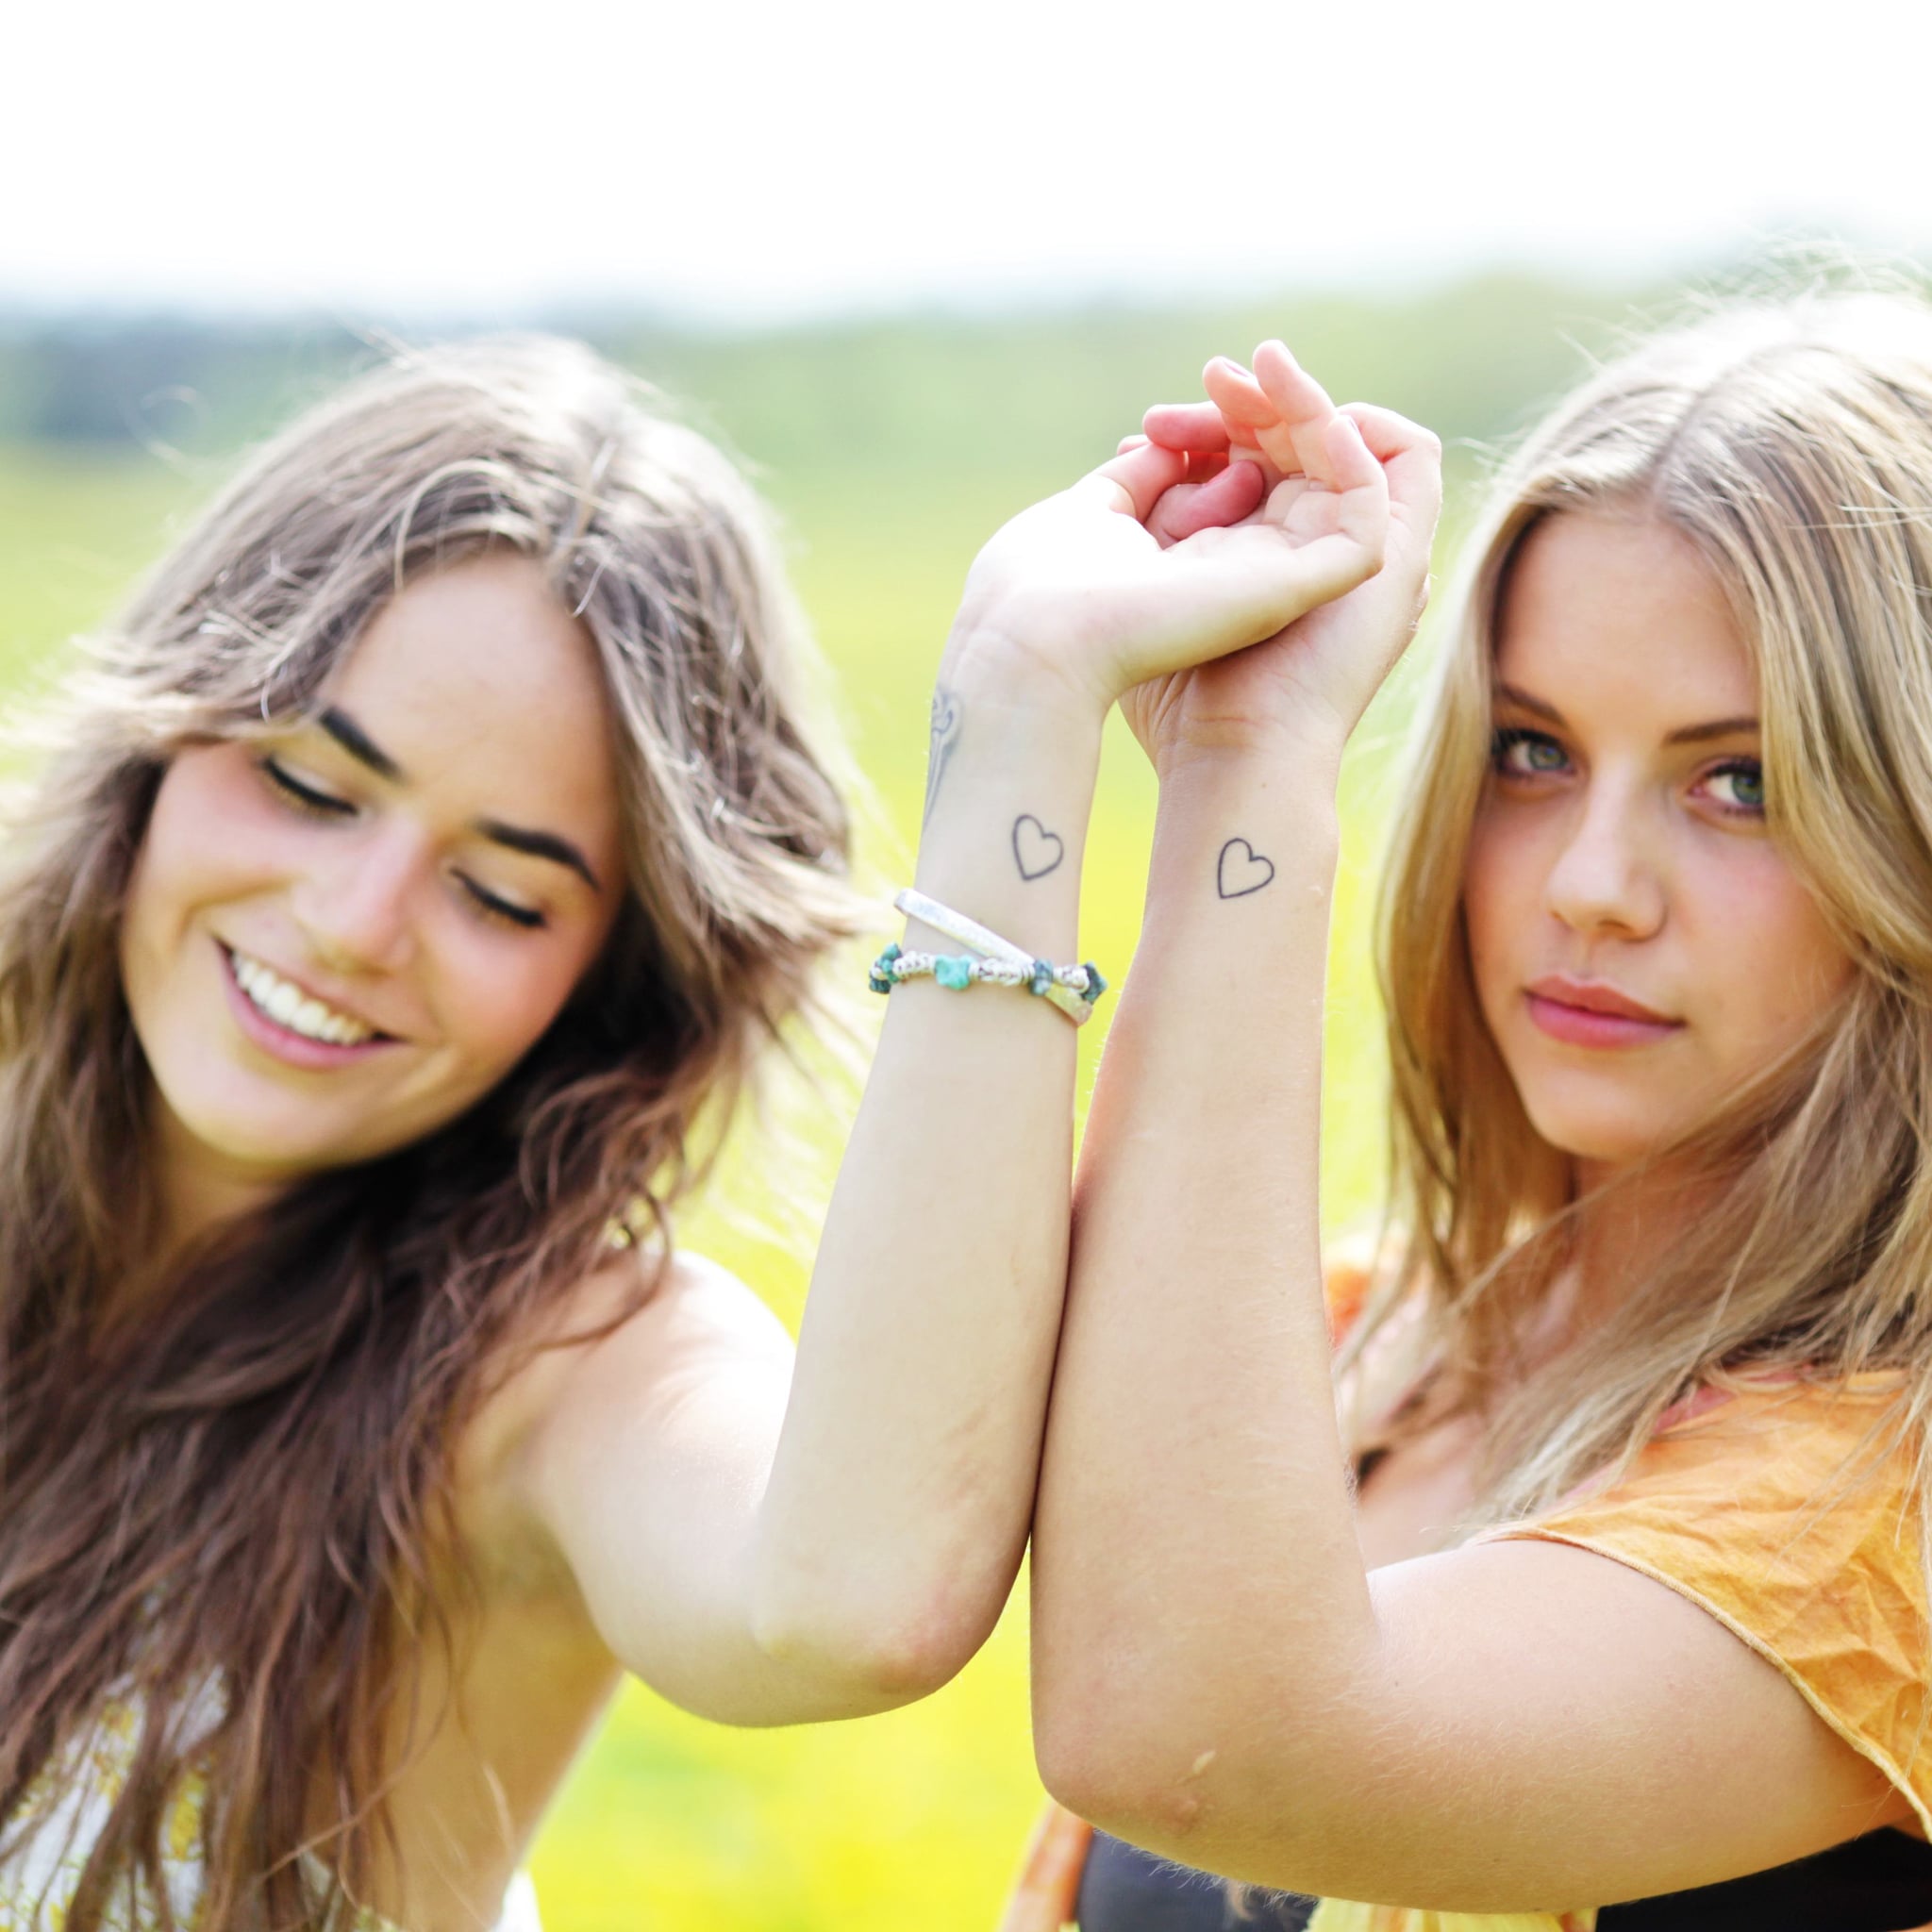 100 Exhilarating Best Friend Tattoos To Bond Over In 2023